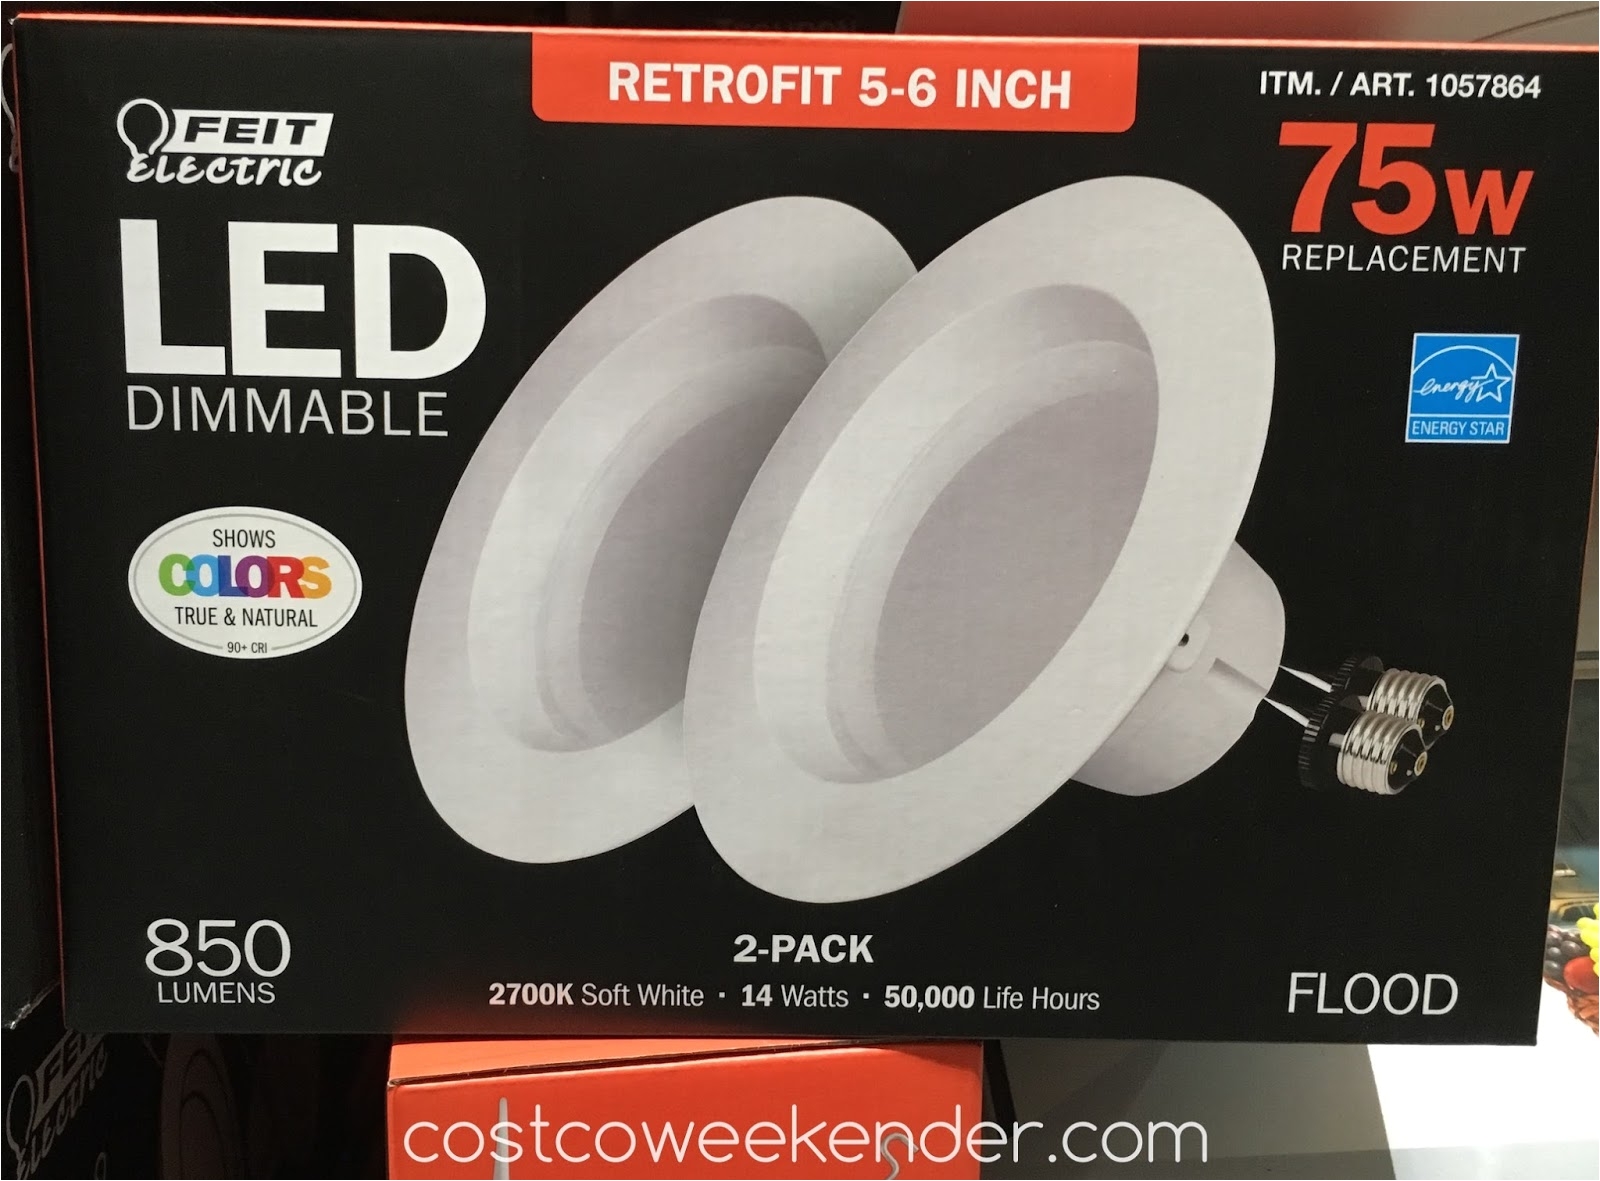 feit electric 75w led dimmable 5 6 retrofit kit easy installation instant on full brightness